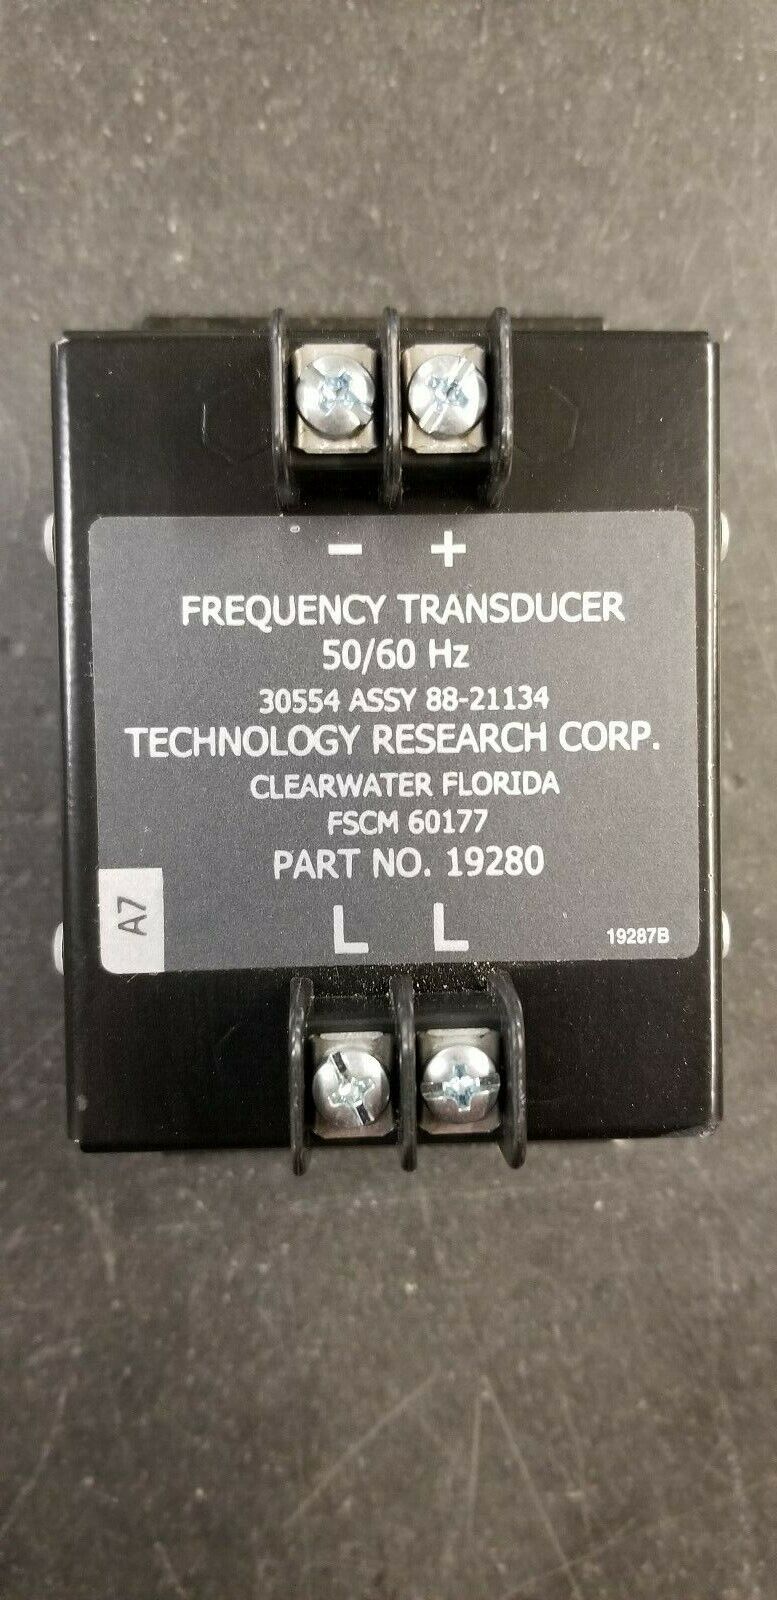 FREQUENCY TRANSDUCER